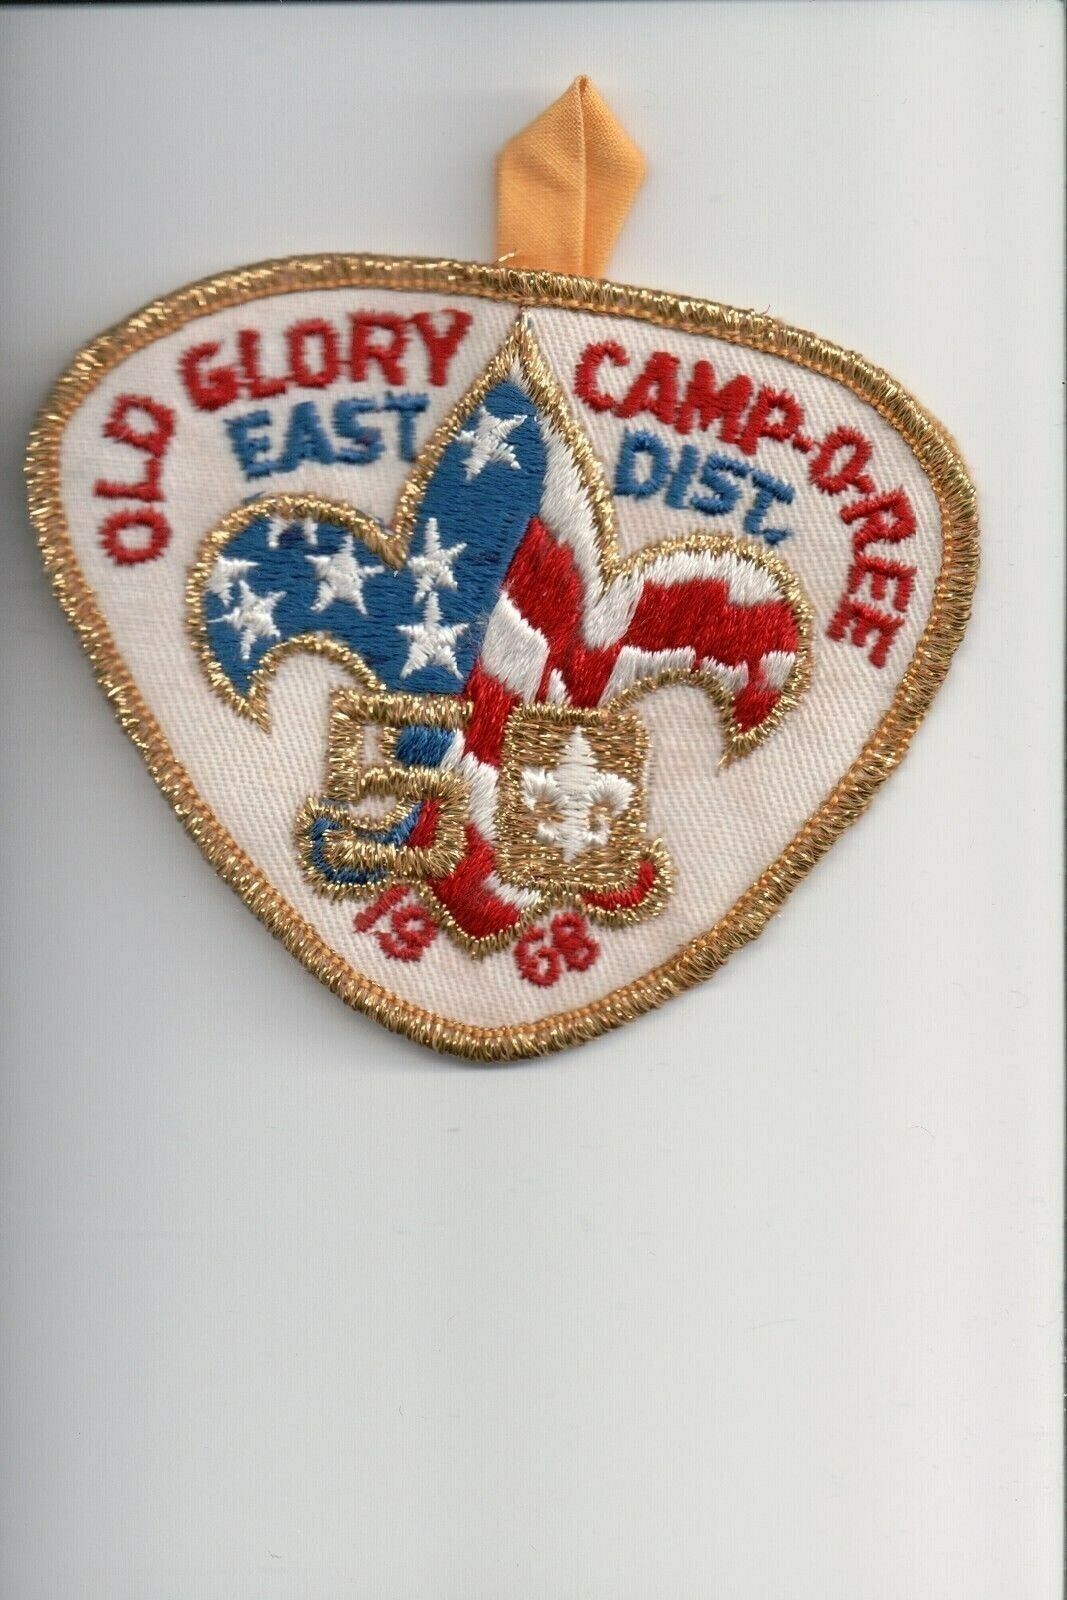 1968 East District Old Glory Camp-O-Ree patch